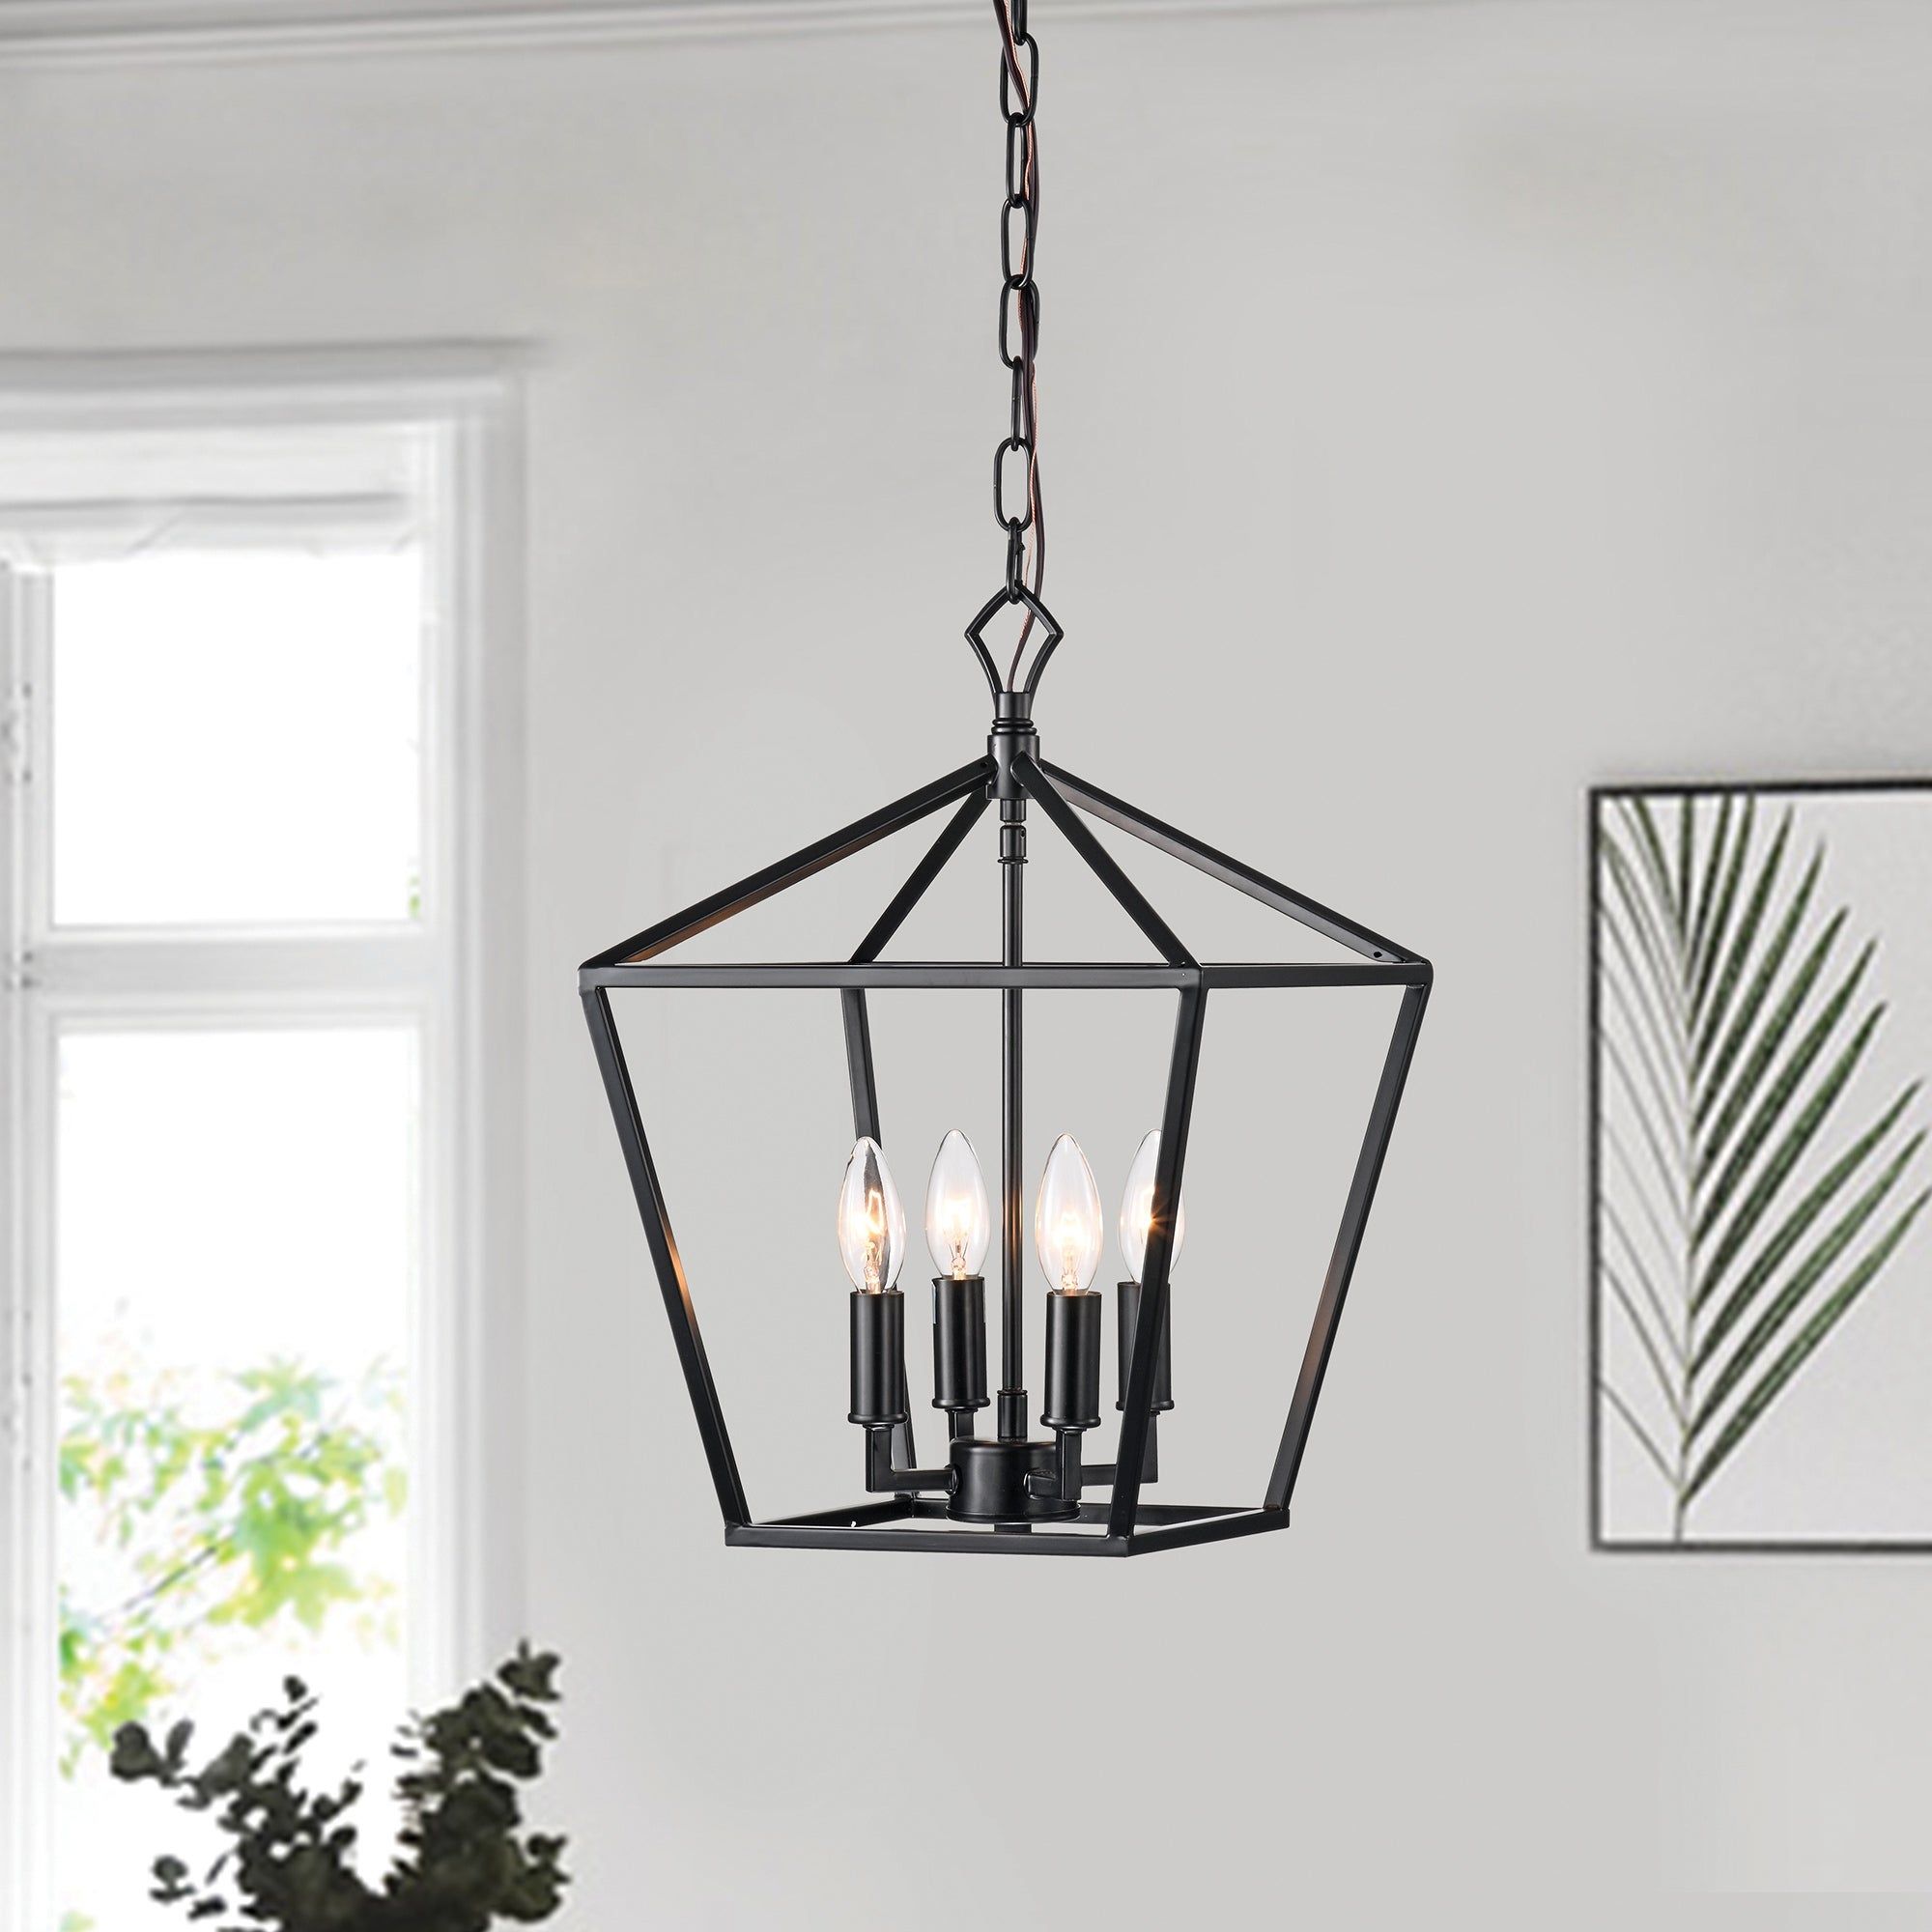 Matte Black 4 Light Lantern Pendant 12 In With Nickel Or Black Sleeve – On  Sale – Overstock – 34157357 Pertaining To Black With White Lantern Chandeliers (View 10 of 15)